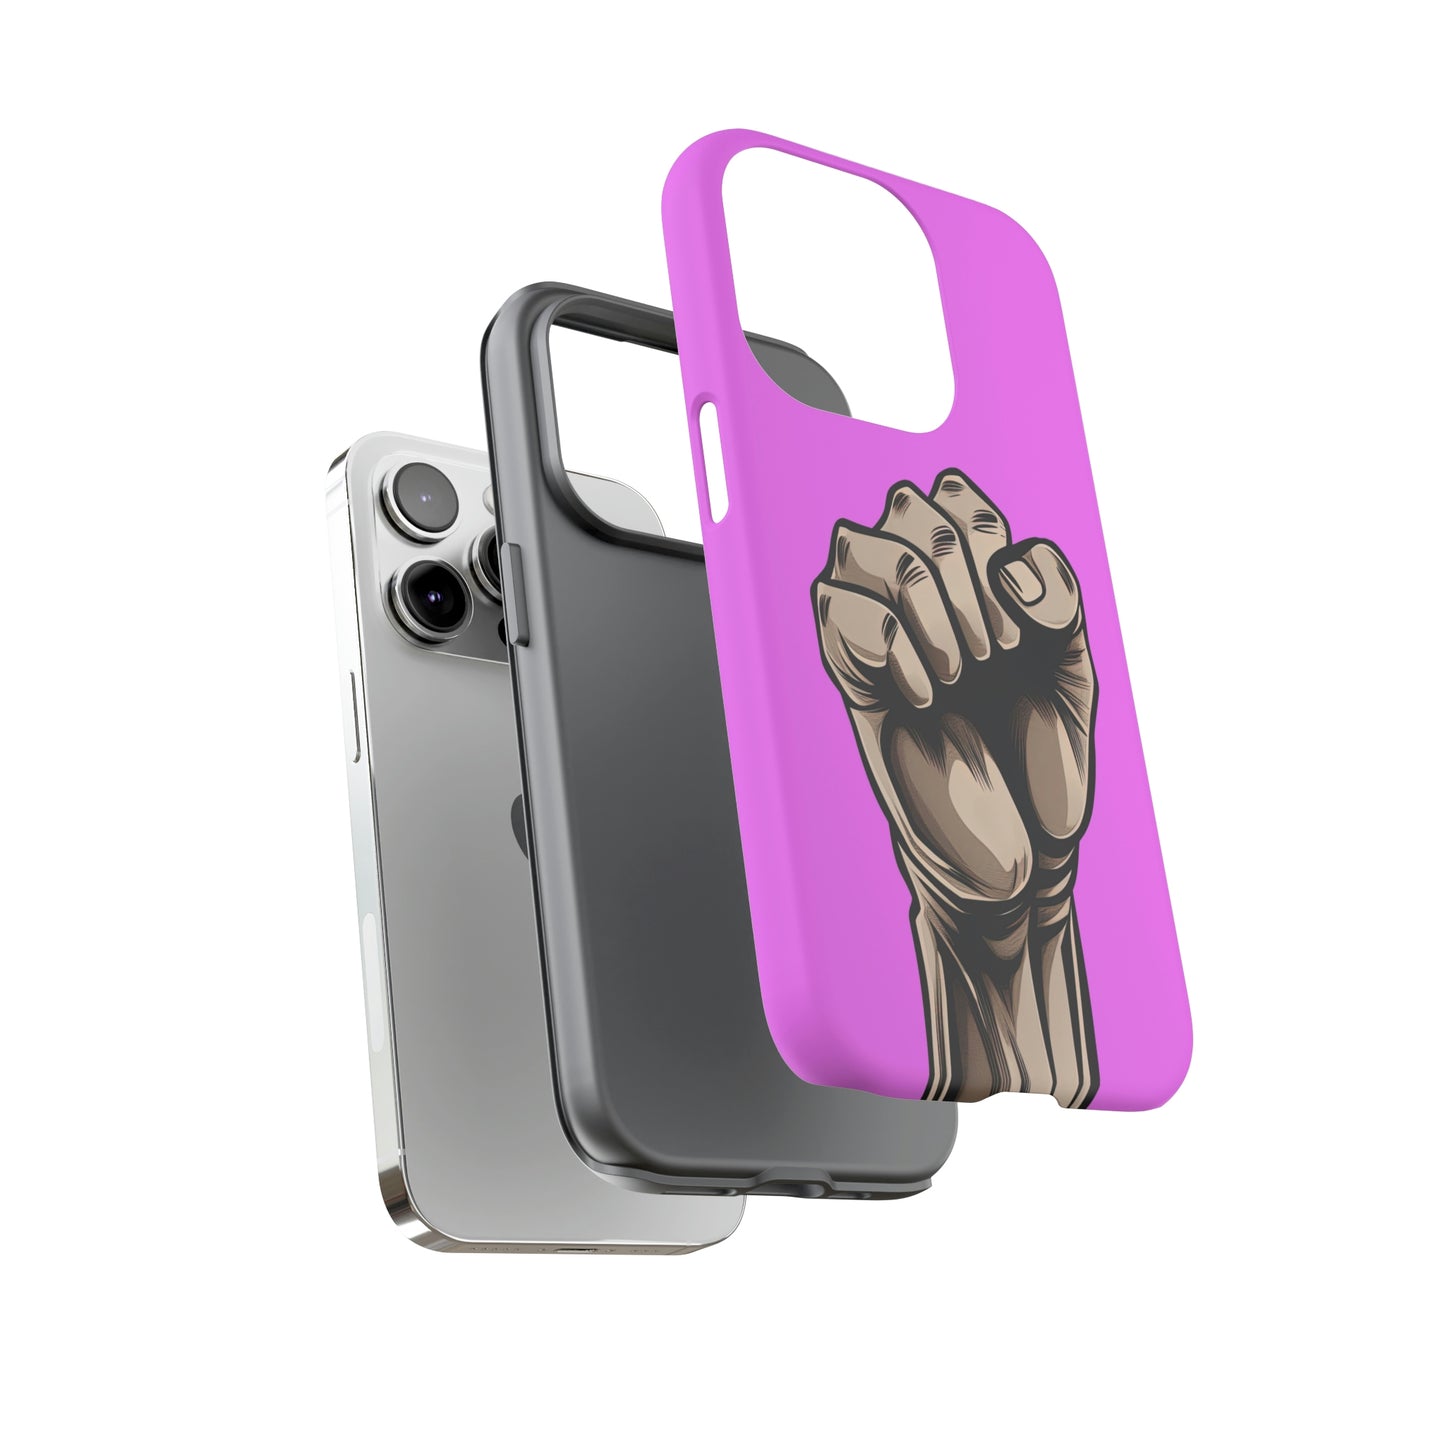 Dual Layer View of Women's Fist of Protest Tough iPhone Case